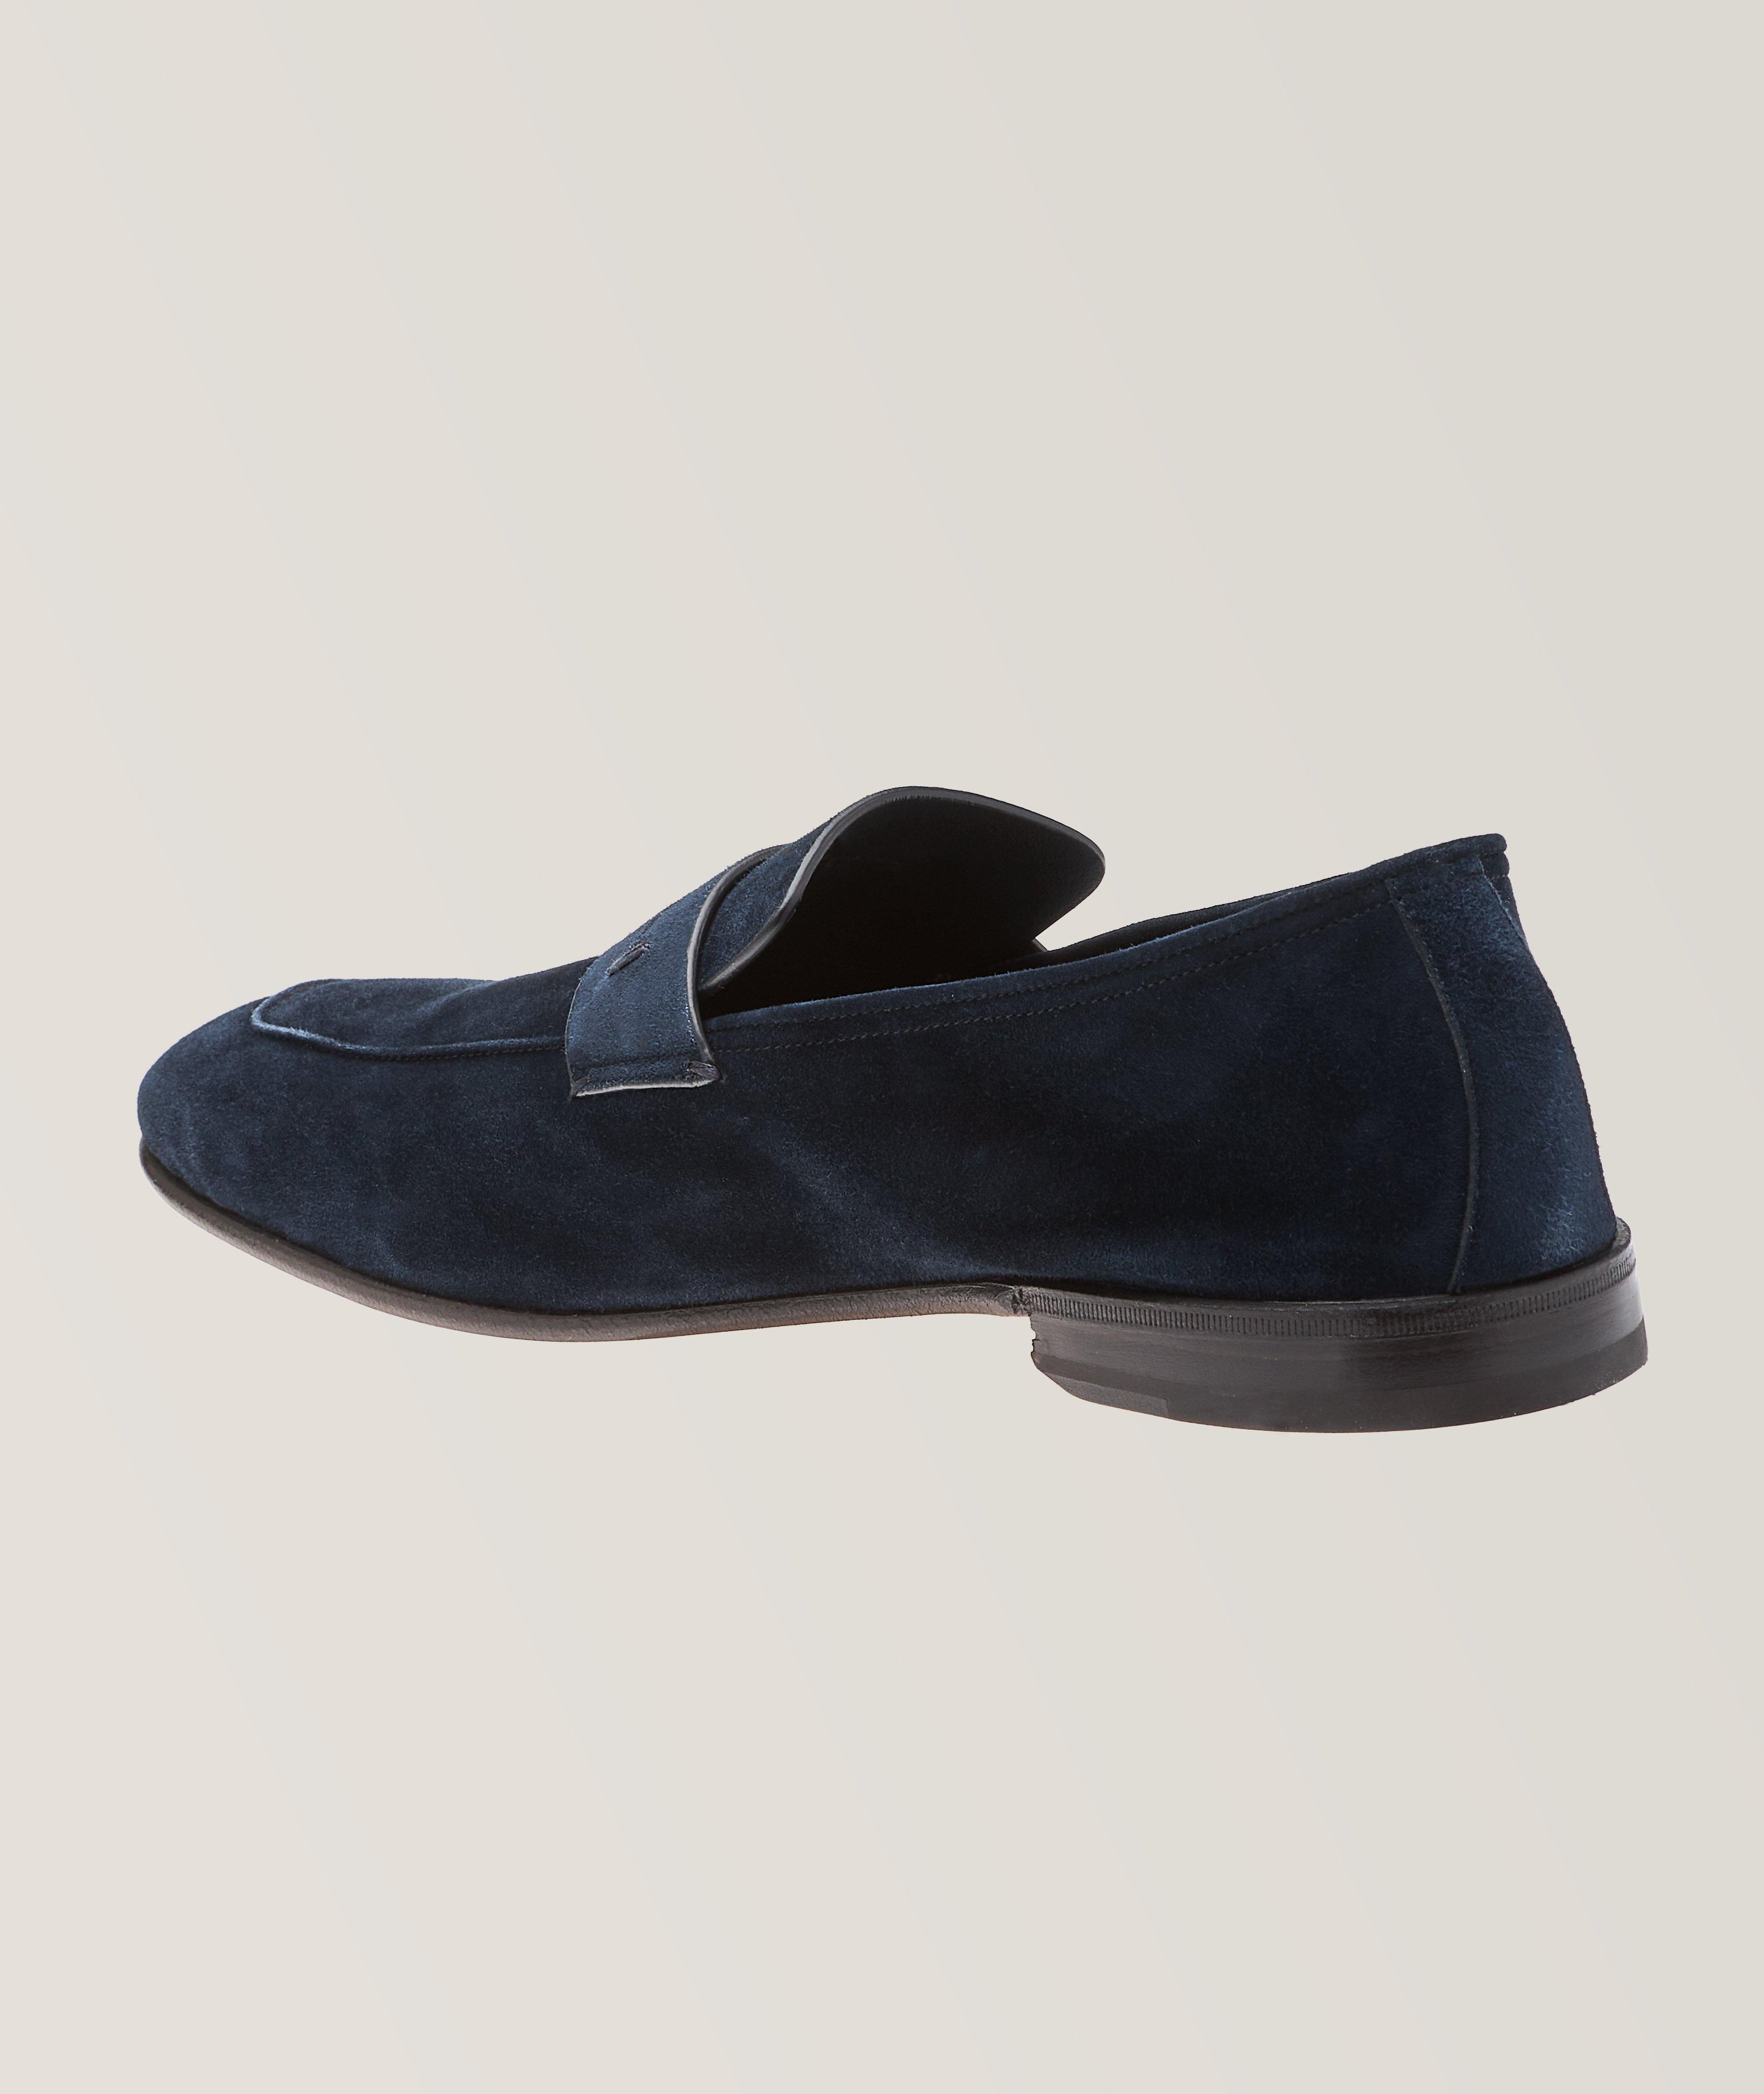 L'Asola Unconstructed Suede Penny Loafer image 1